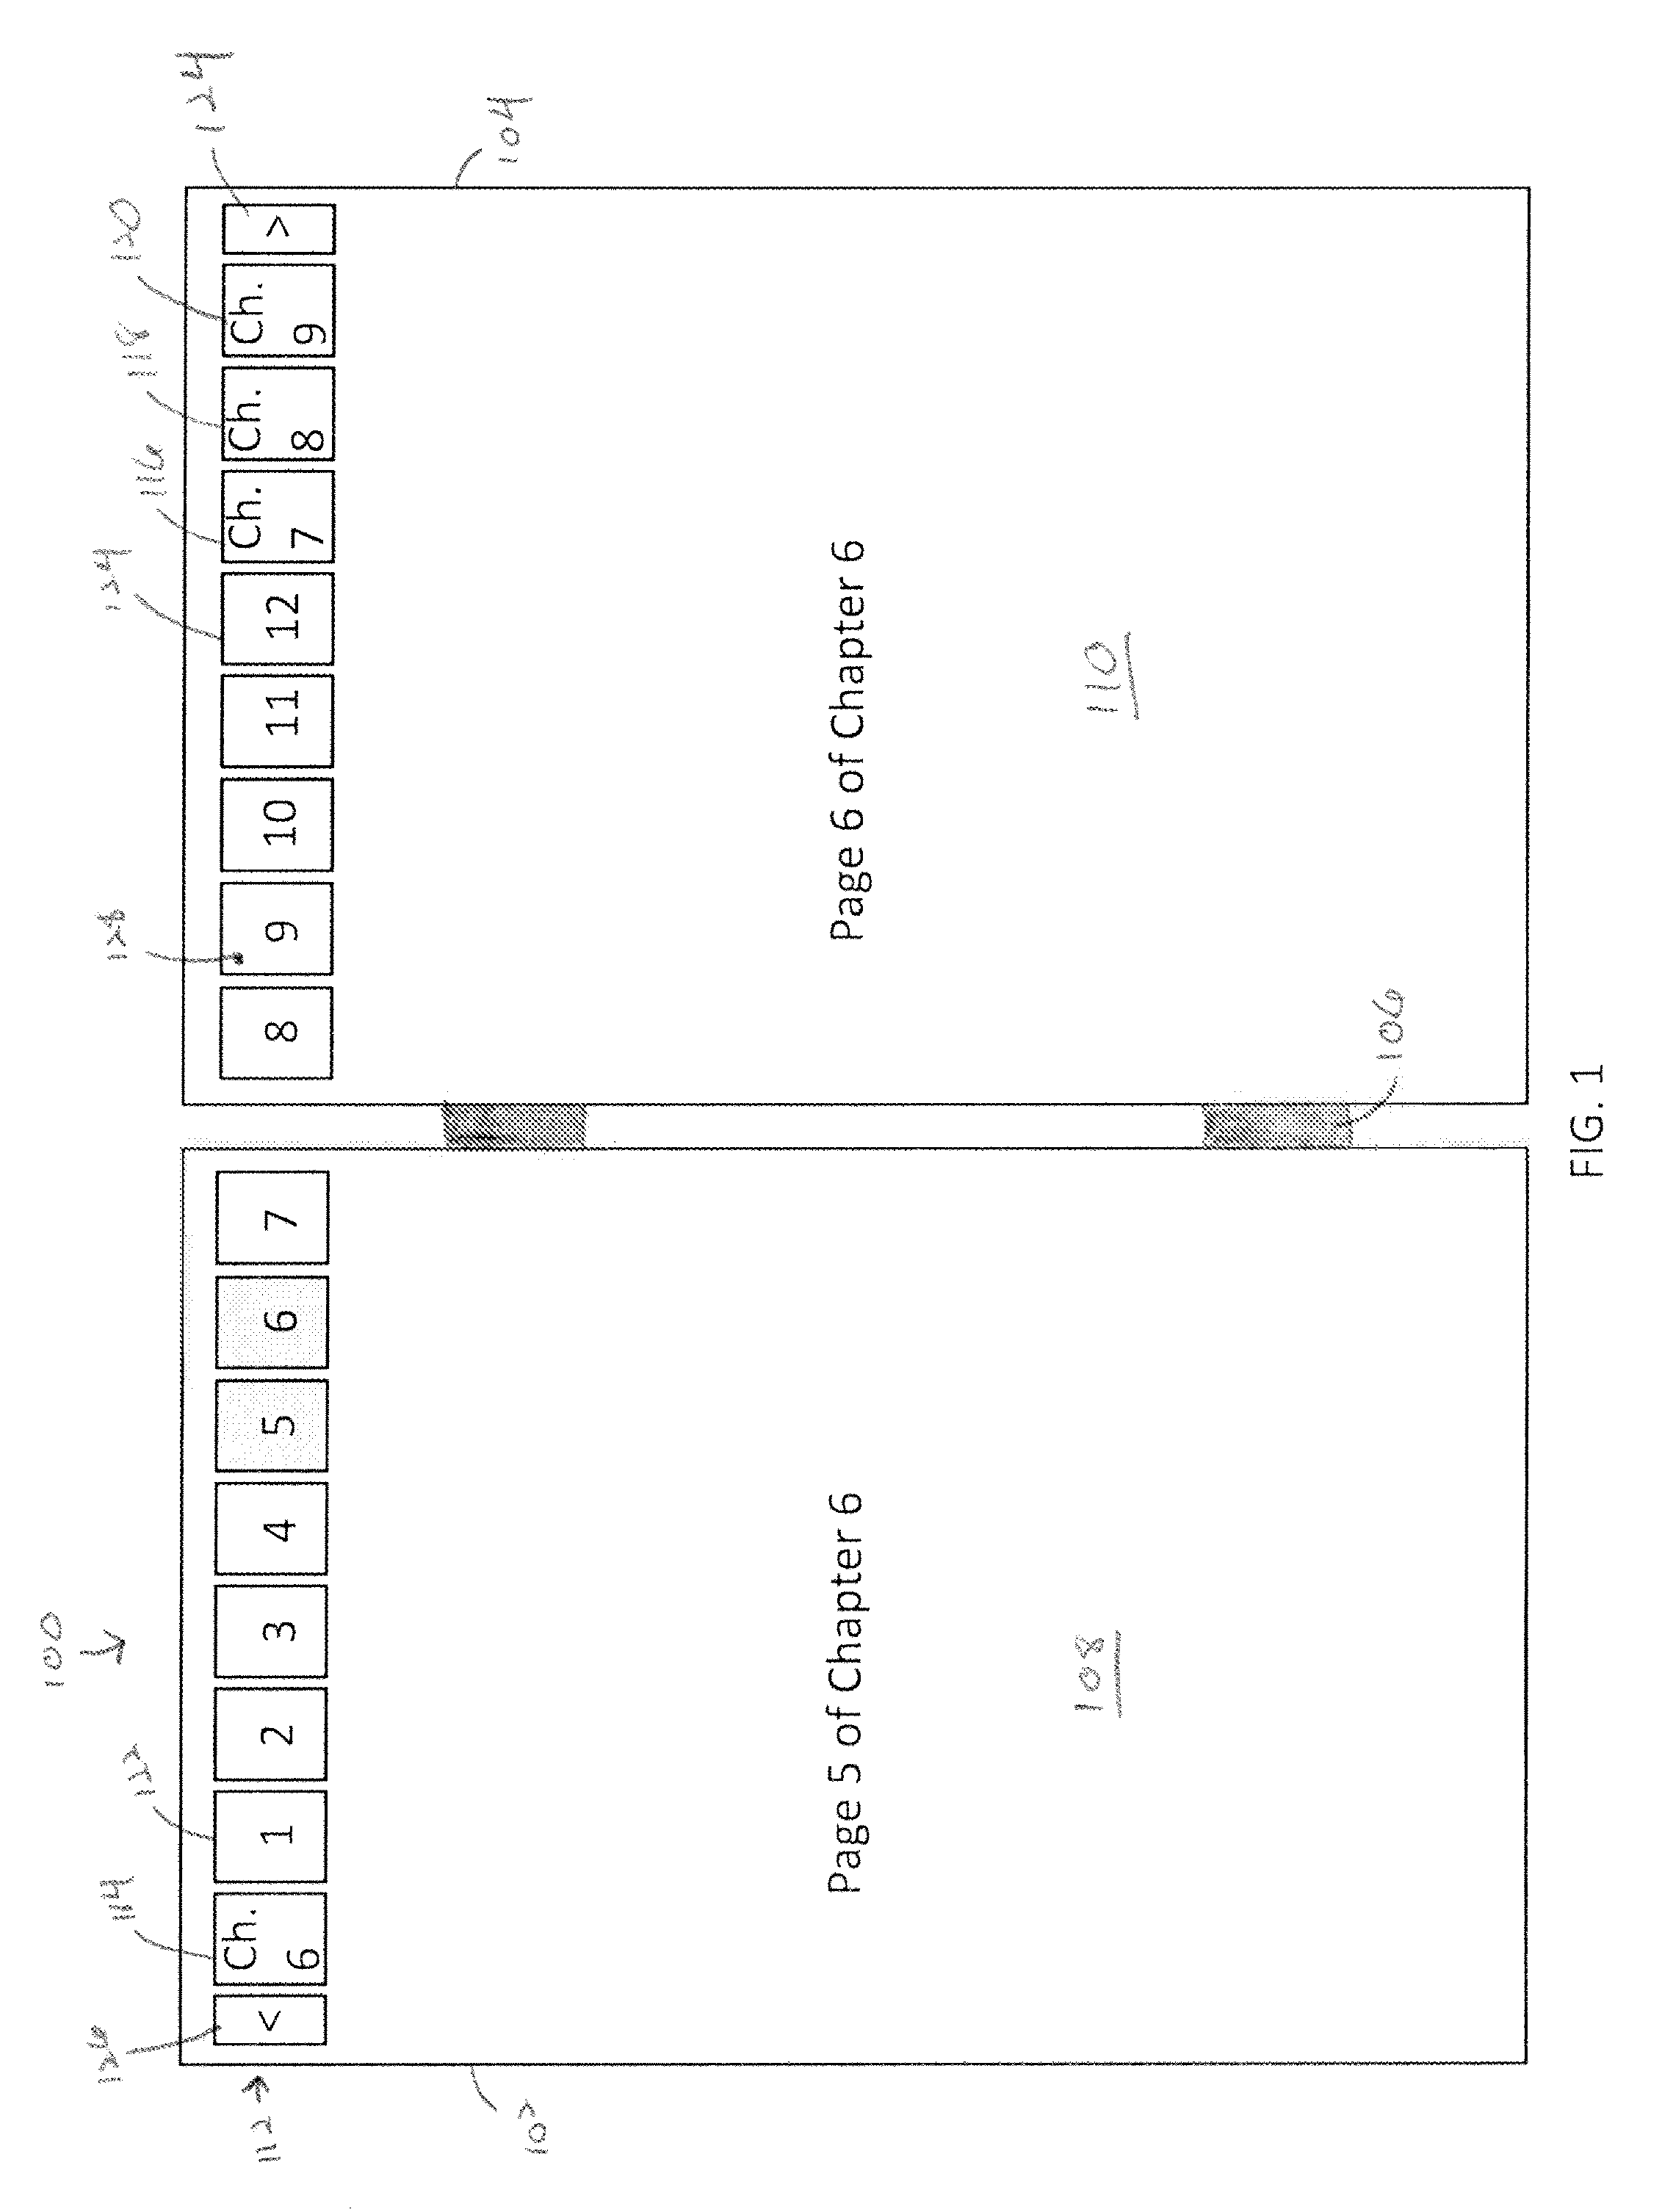 Apparatus and Method for Digital Content Navigation